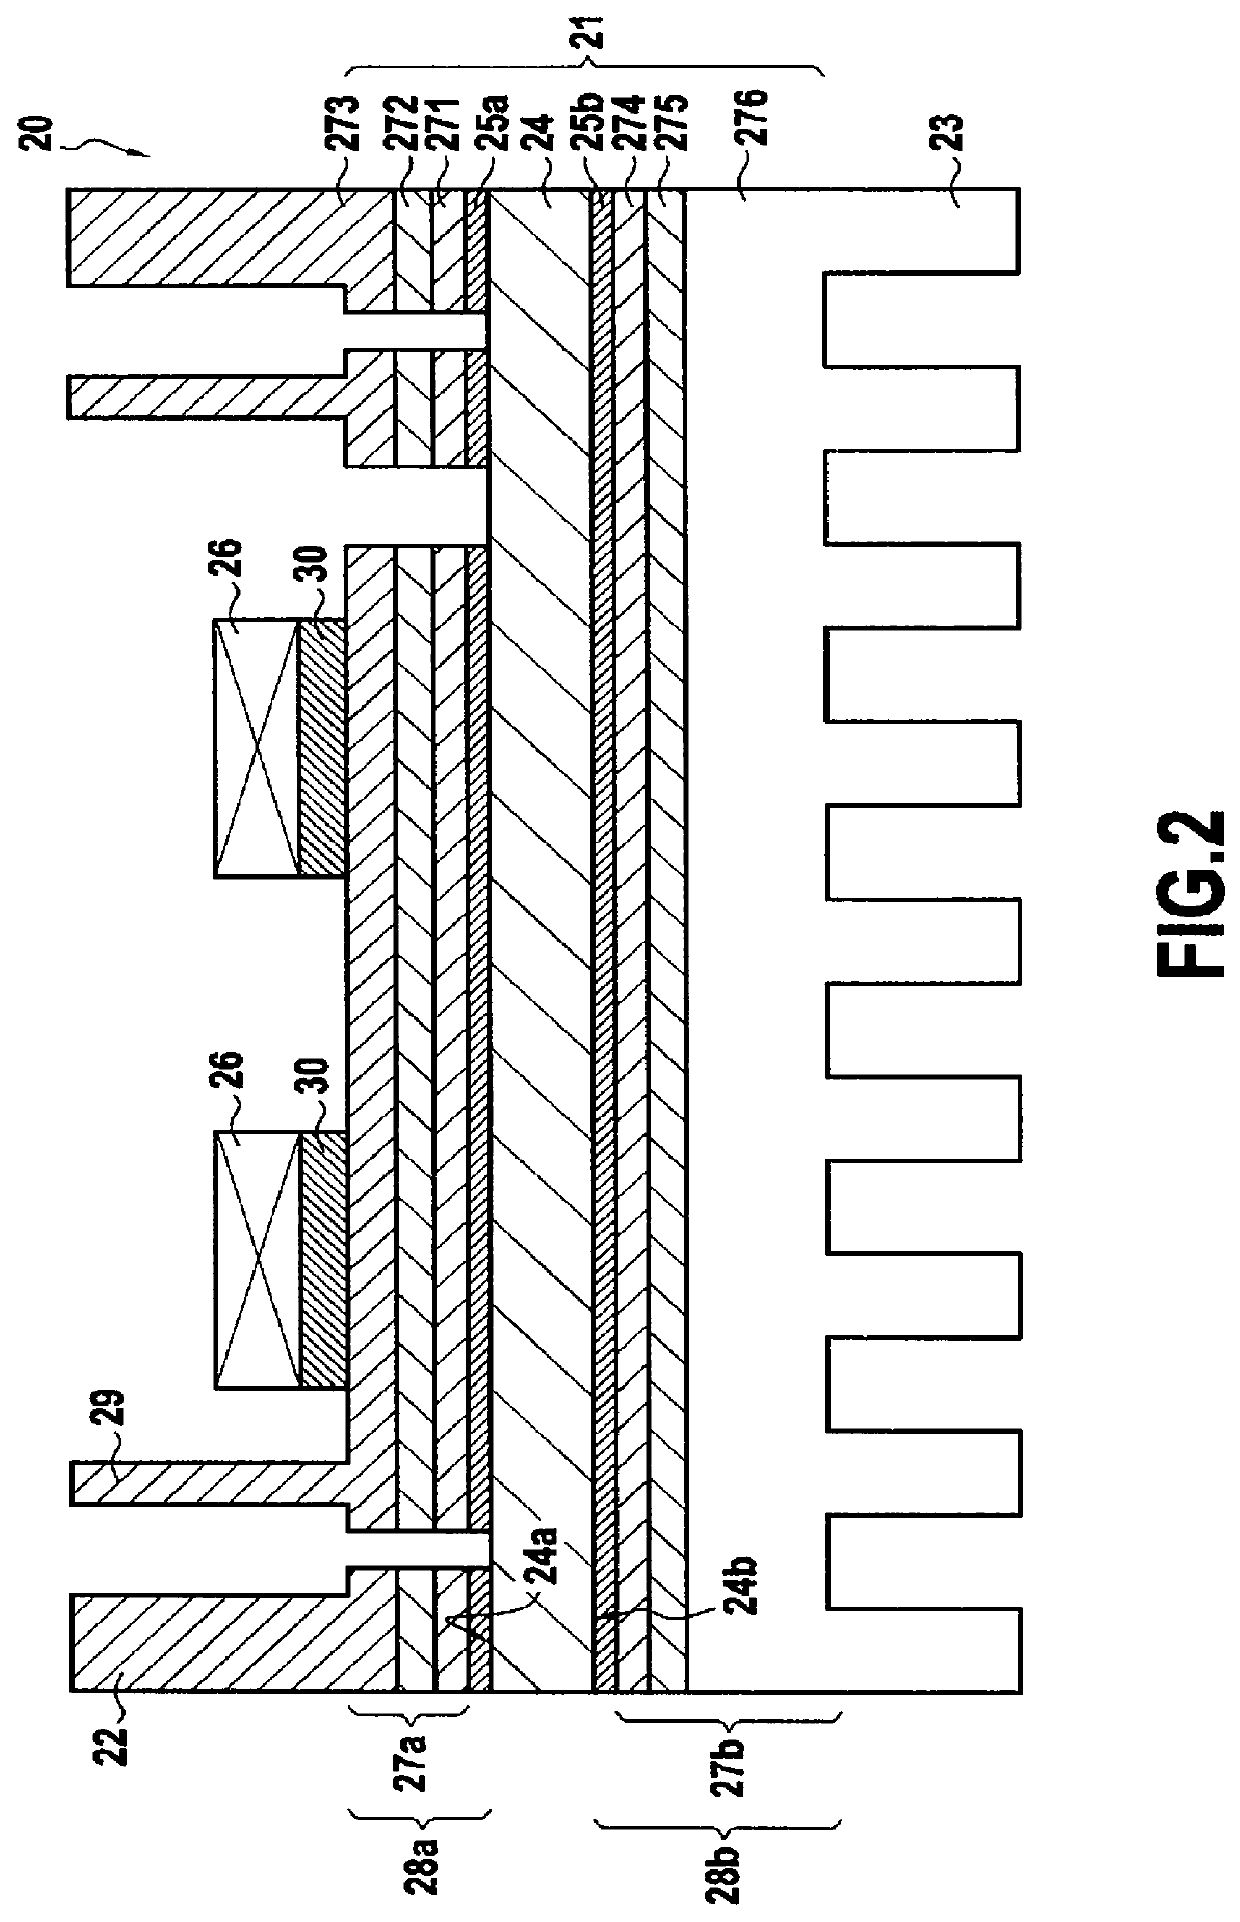 Method of fabricating an electronic power module by additive manufacturing, and associated substrate and module